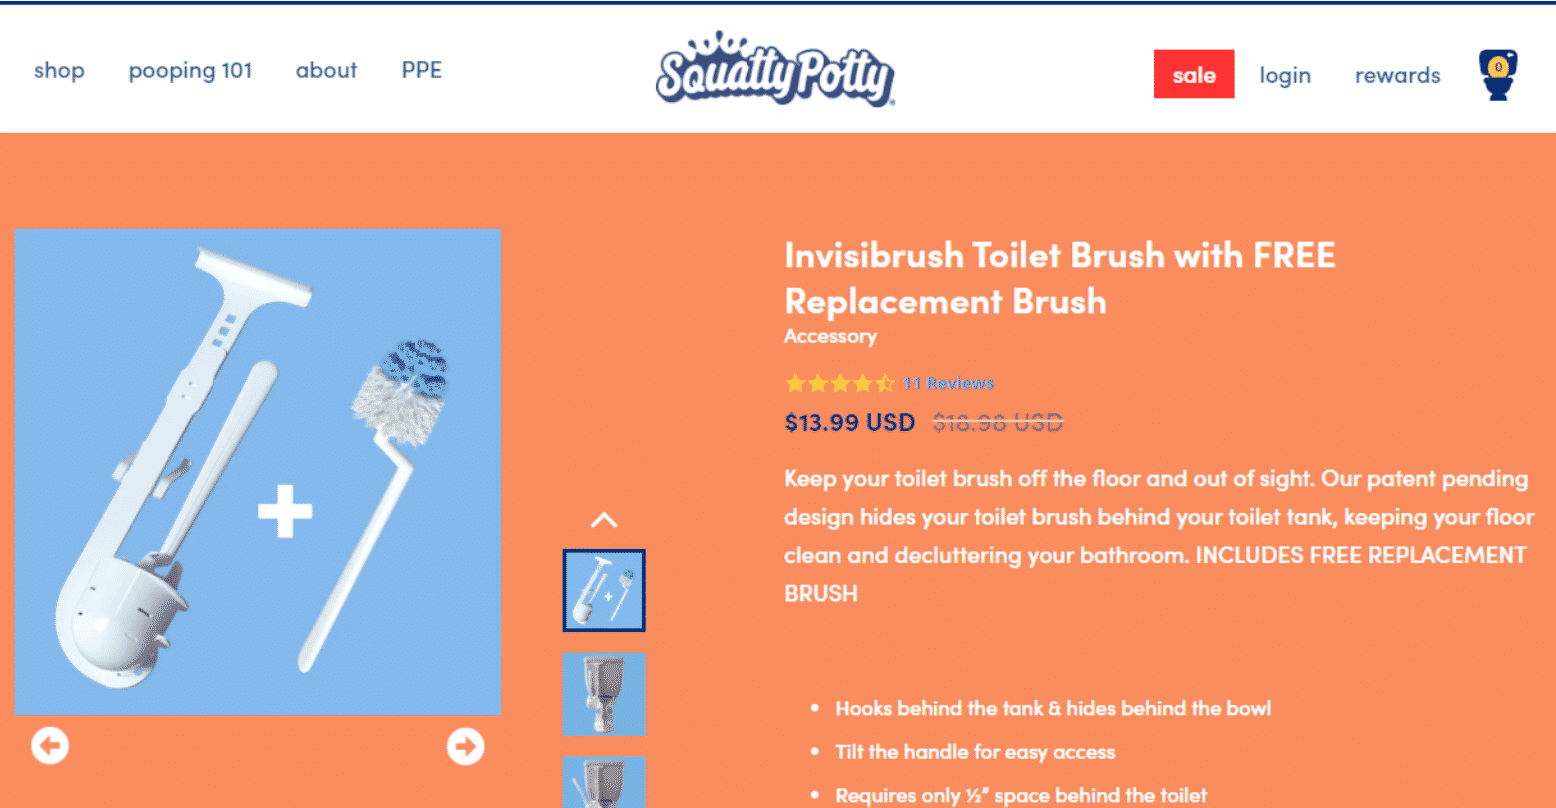 Example of a product bundling from Squatty Potty retailer.